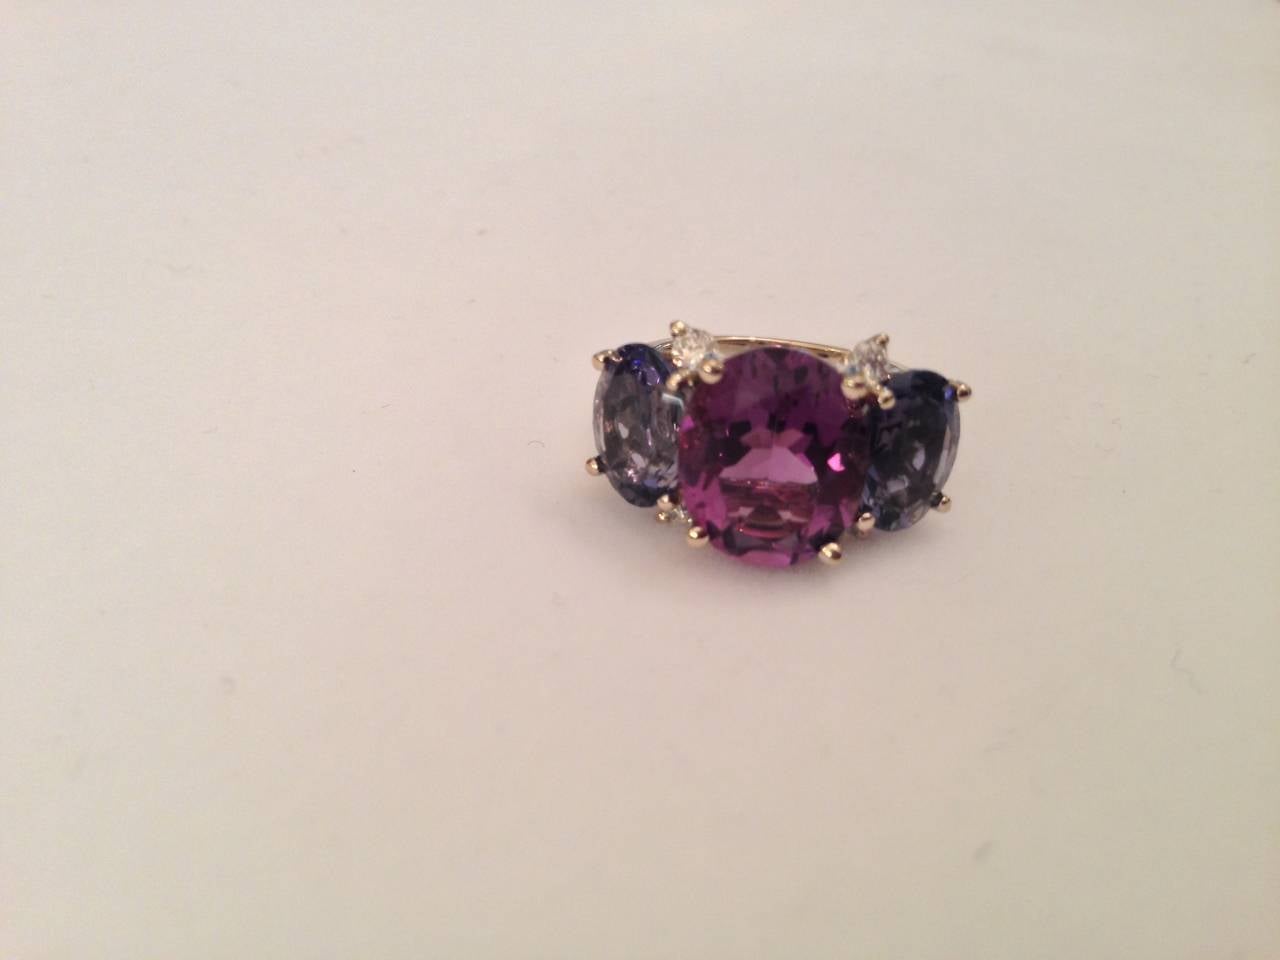 Elegant Three Stone Ring - For day or Evening.
18kt Yellow Gold Medium GUM DROP™ Ring with Facted center Amethyst and two faceted Iolite and four Diamonds ~0.40cts.

The ring can be sized or ordered to your ring size.

The GUM DROP™ Ring